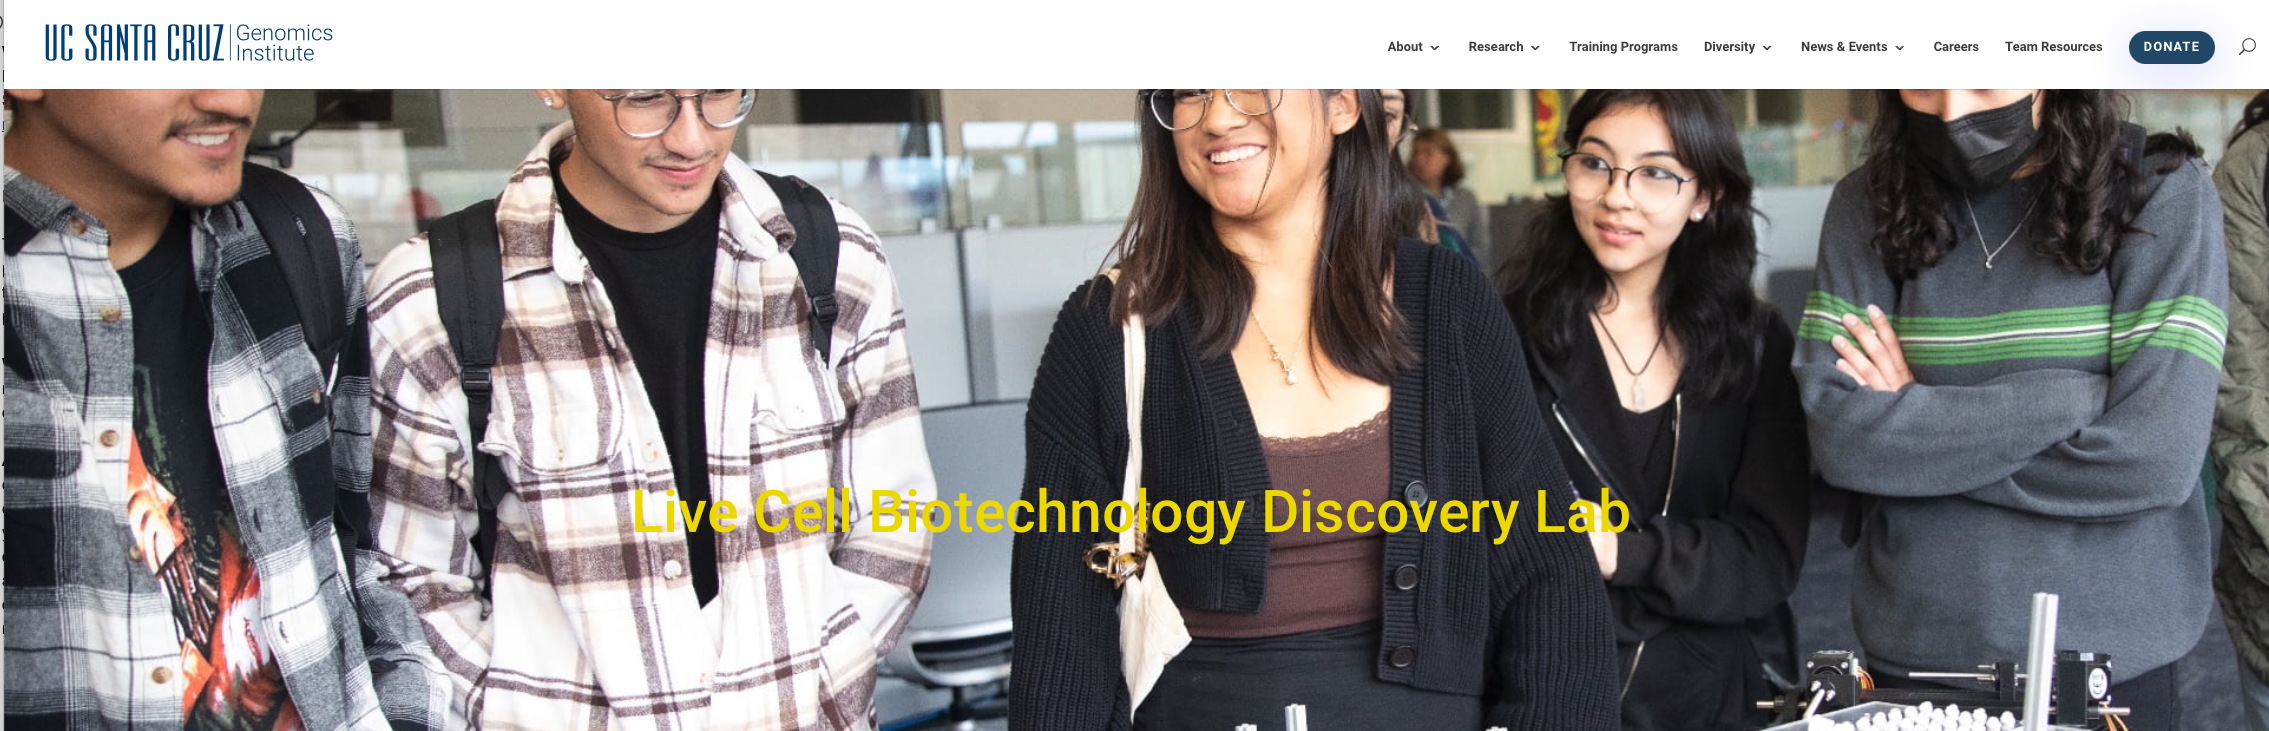 Live Cell Biotechnology Discovery Lab Logo